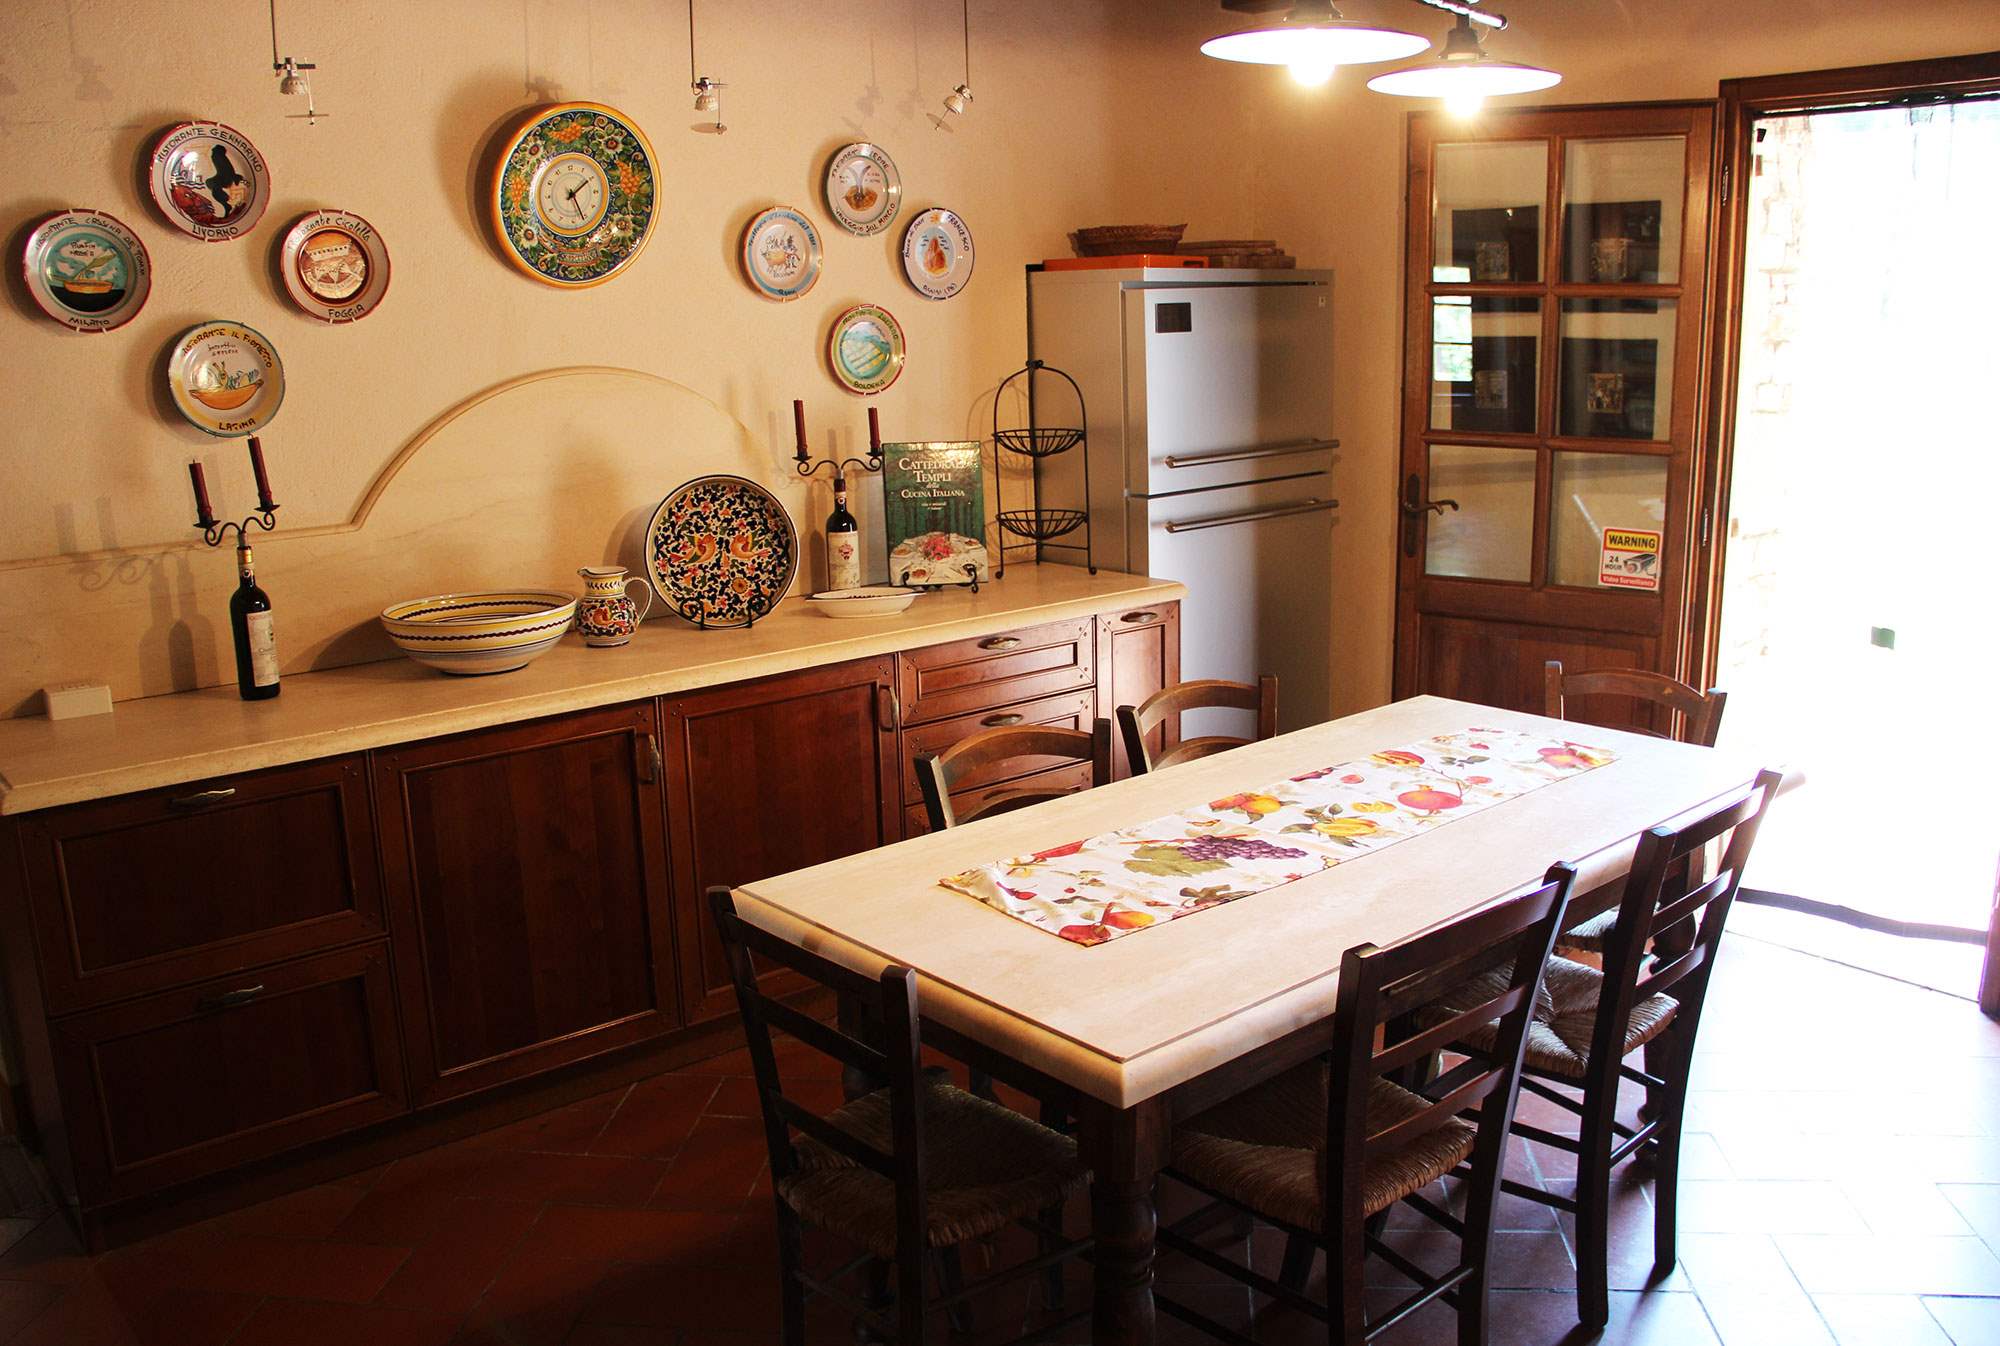 Villa Felicita, Main house only, up to 6 persons , 3 bedroom villa in Chianti & Countryside, Tuscany Photo #10